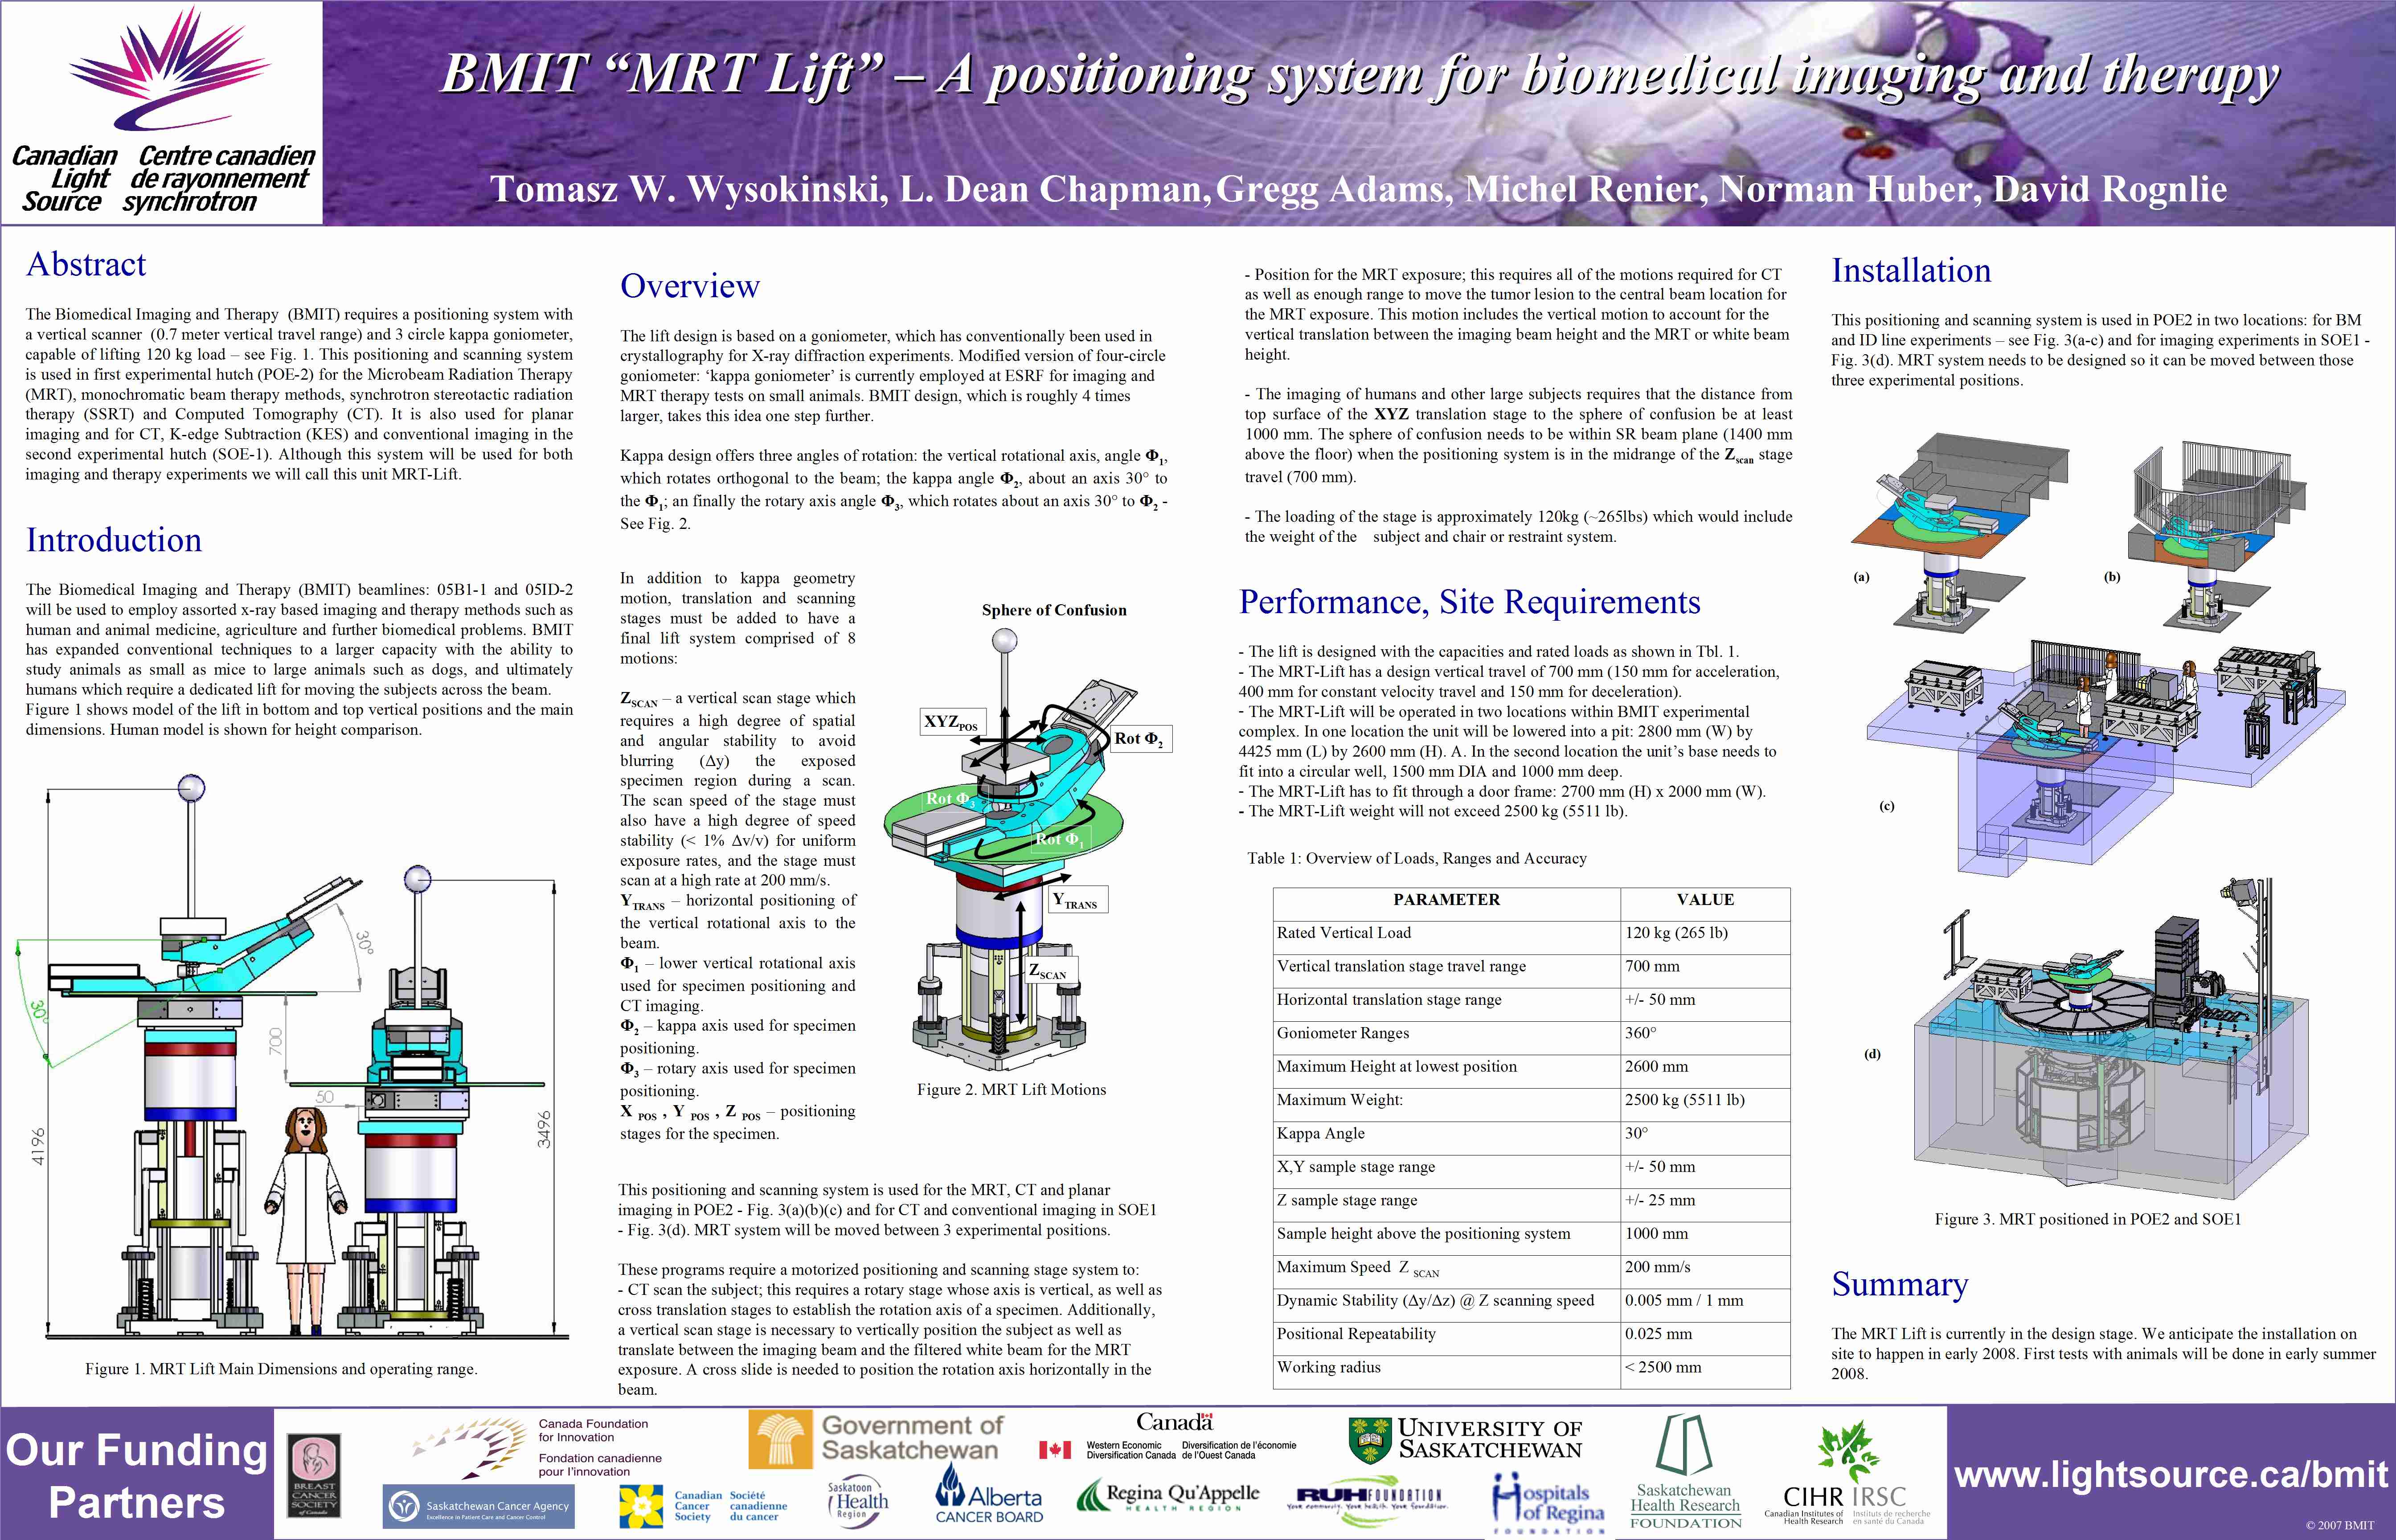 BMIT "MRT Lift" - A positioning system for biomedical imaging and therapy Image